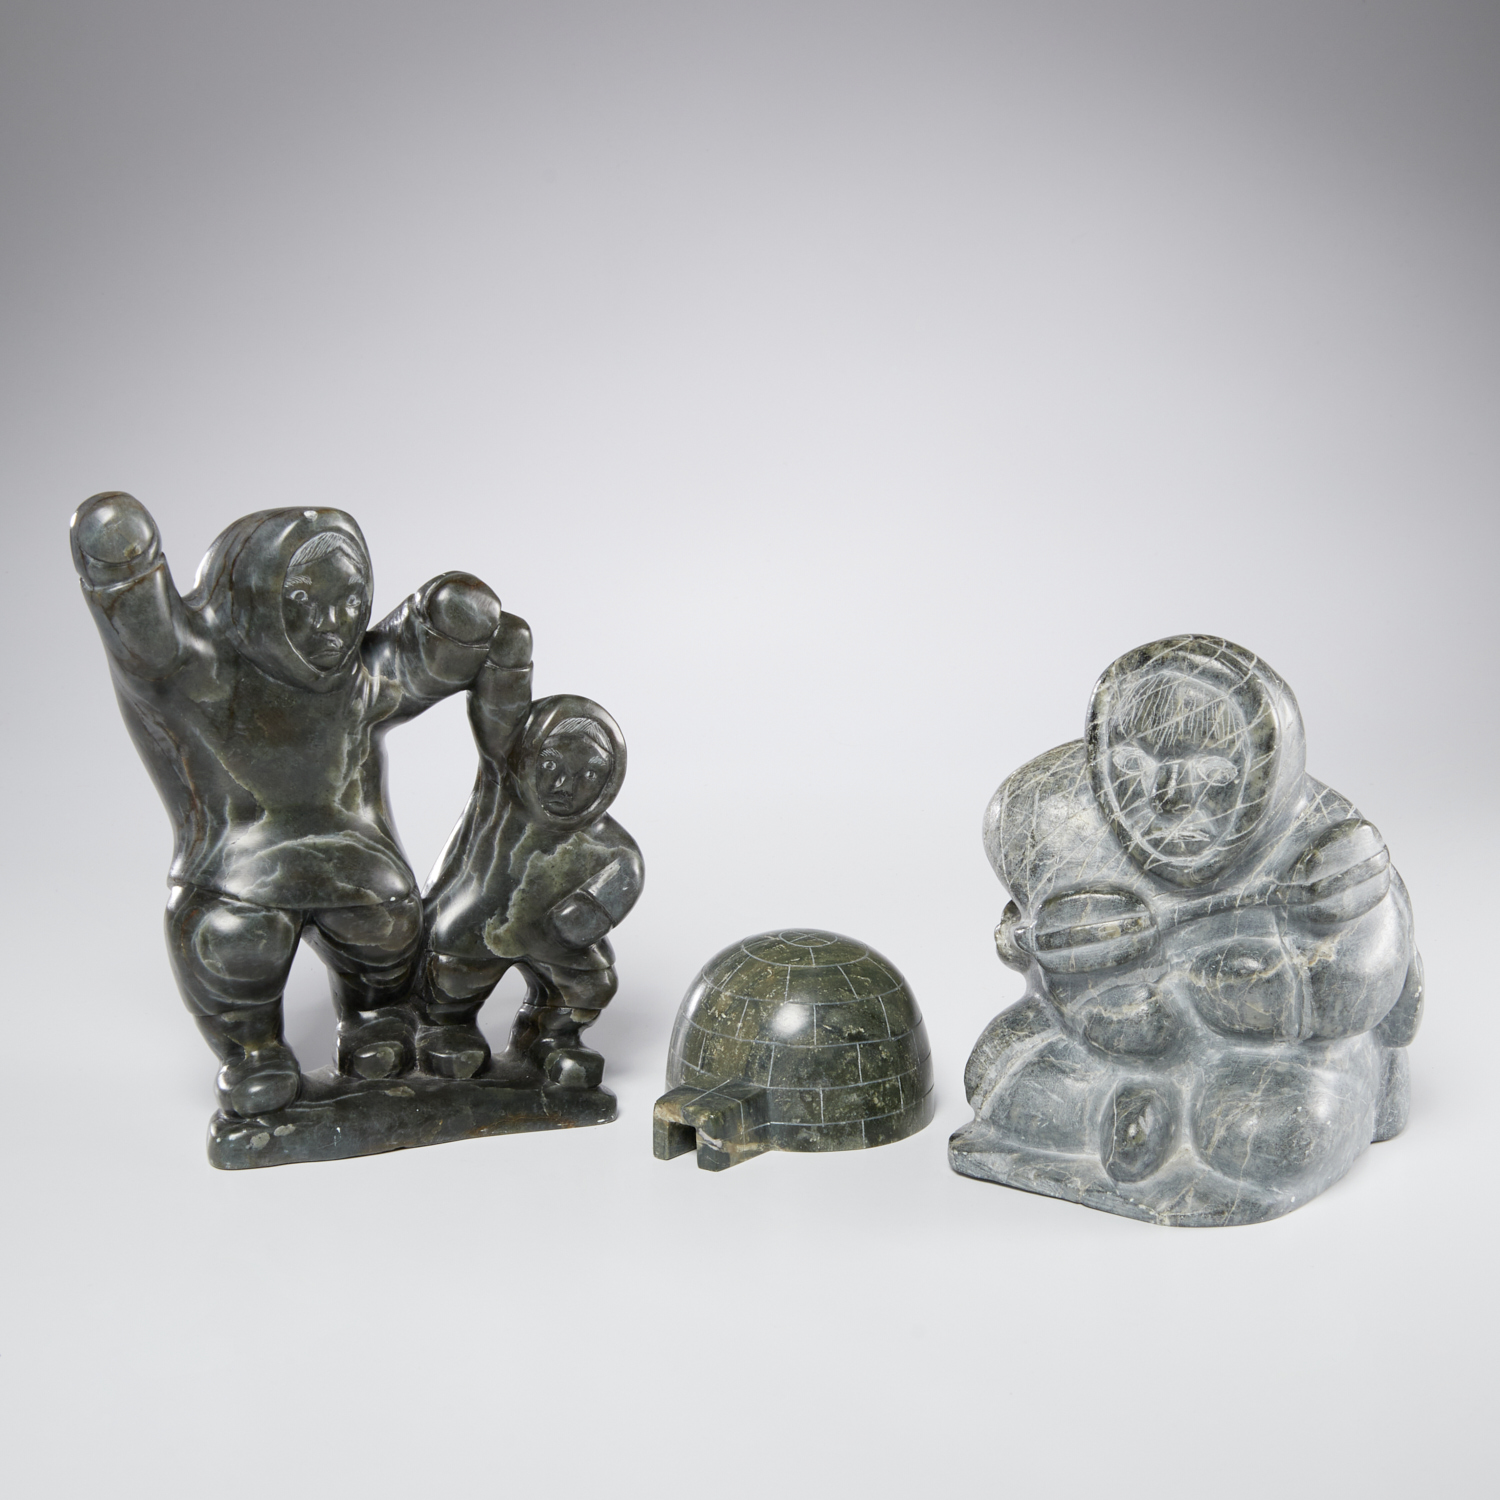  3 INUIT STONE SCULPTURES INCL  30bf31